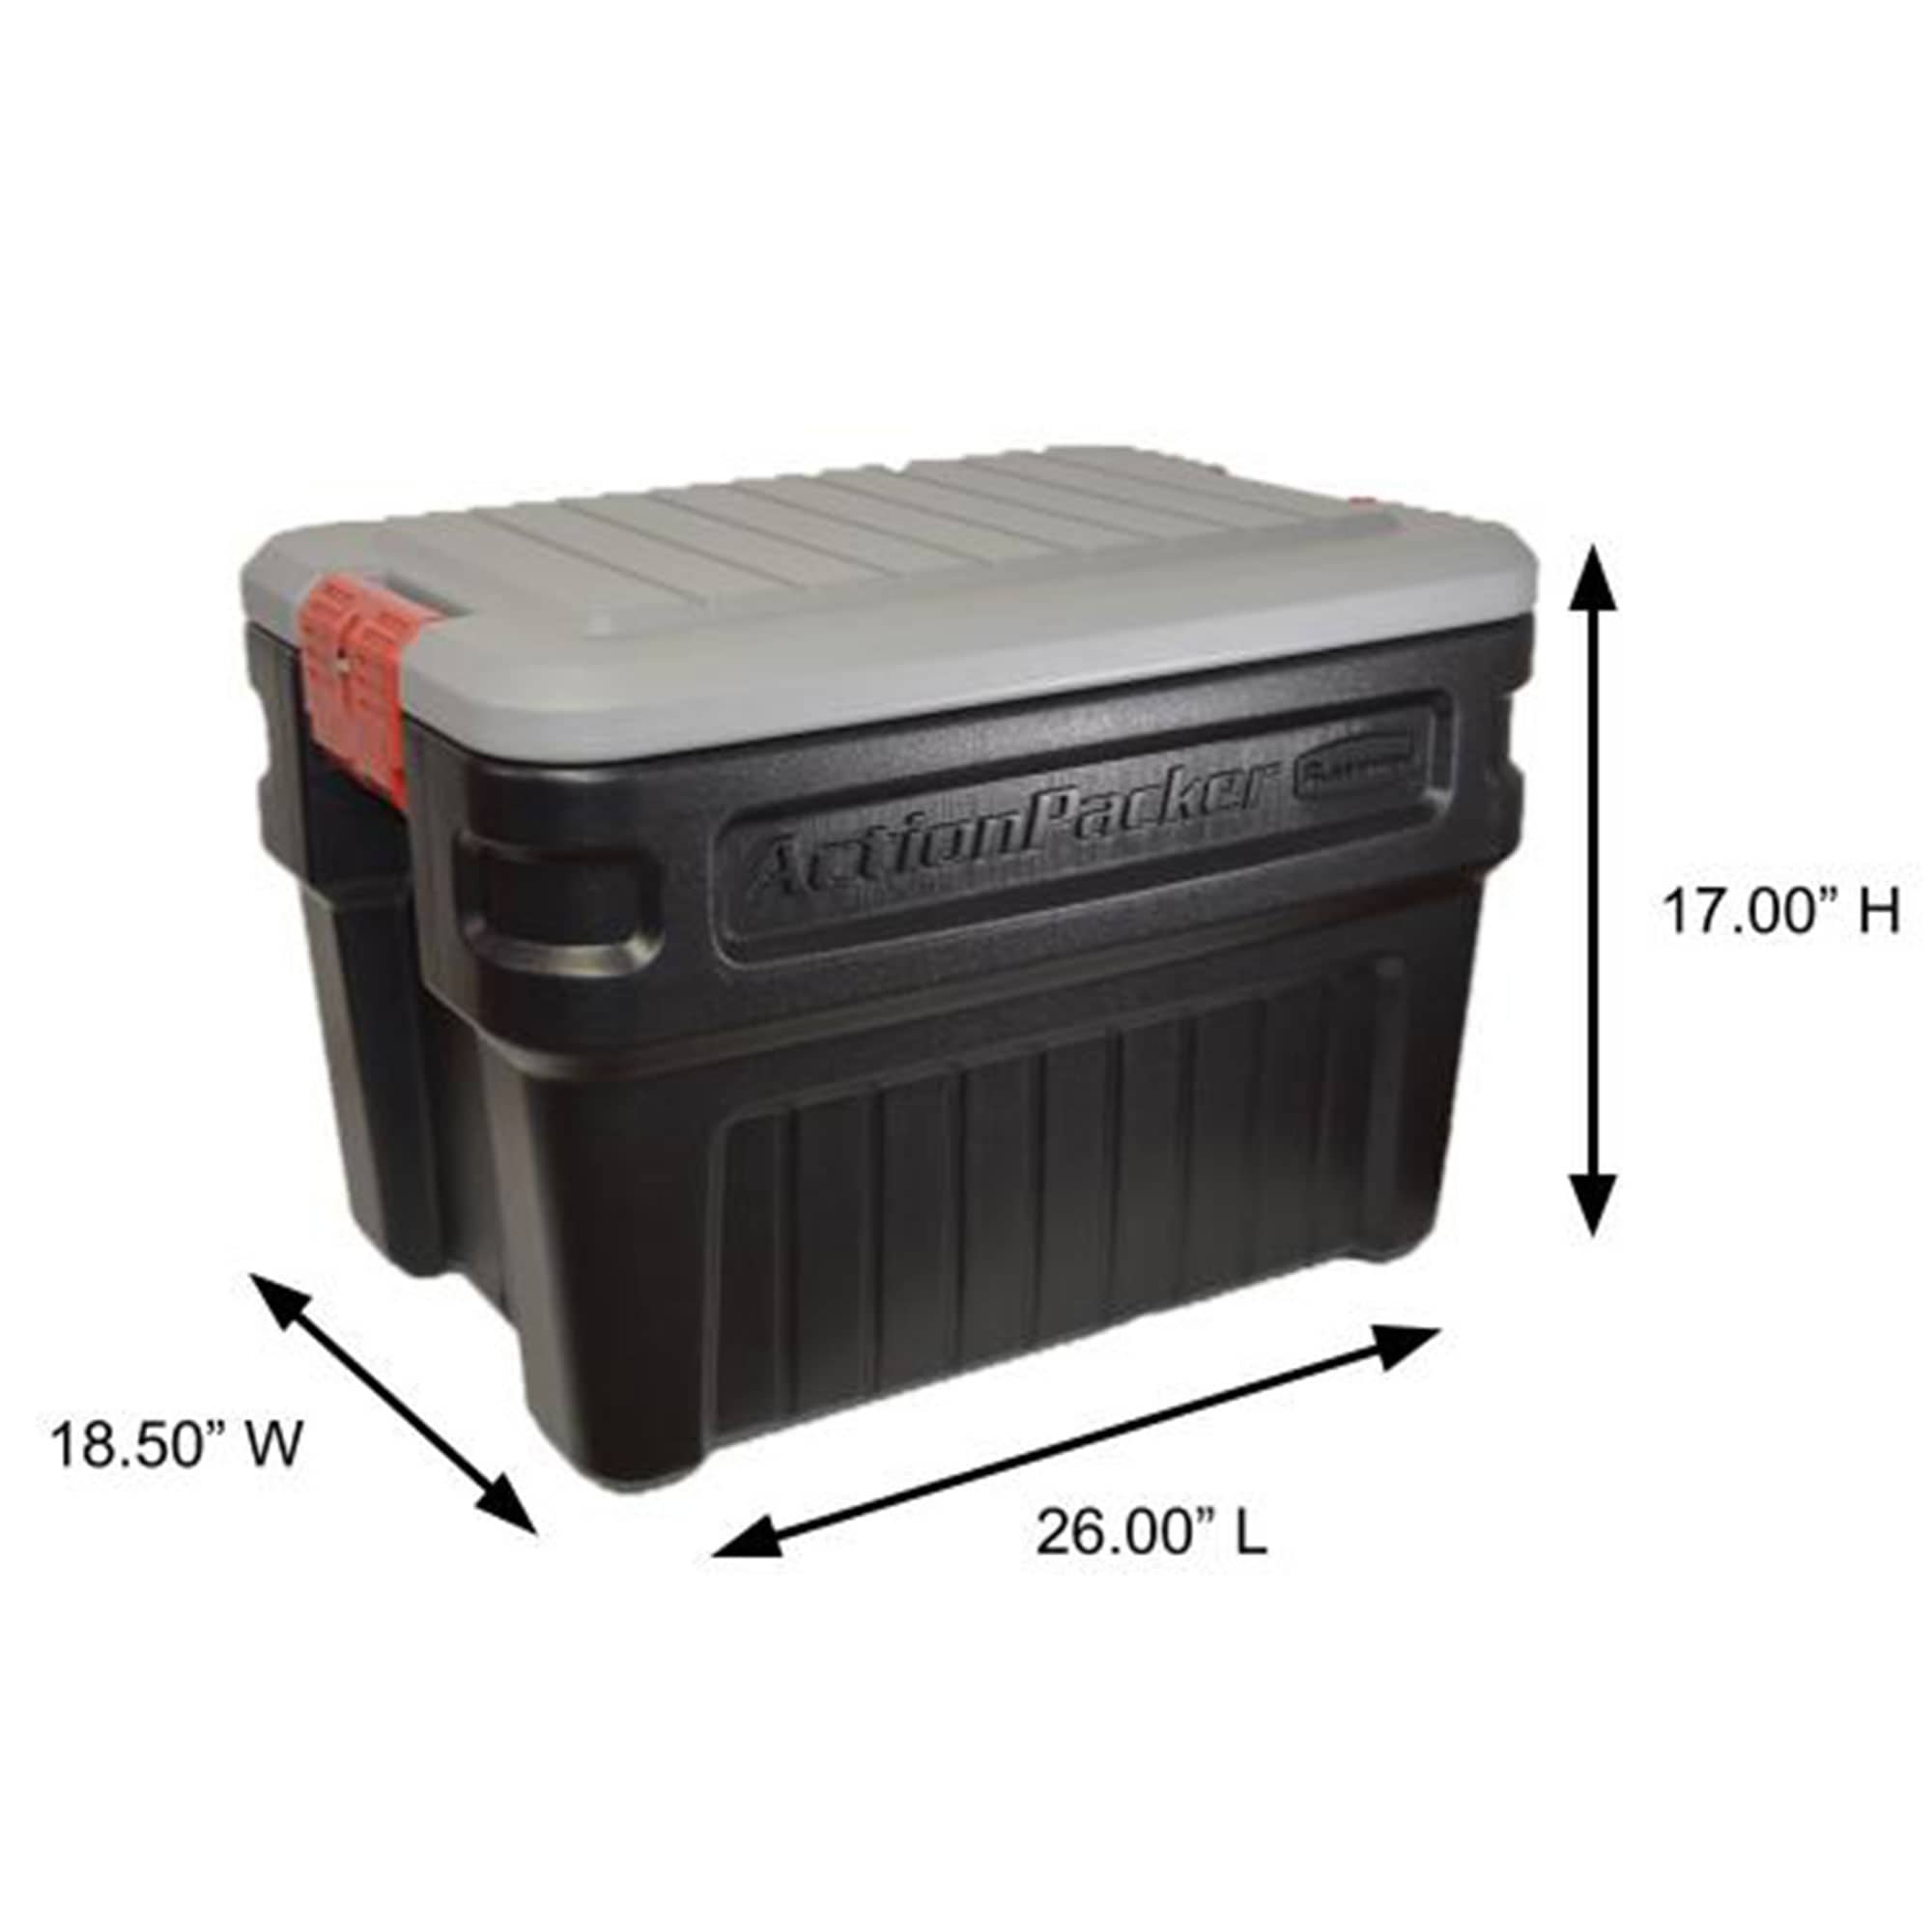 Rubbermaid Commercial ActionPacker Storage Container SKU#RCP1172